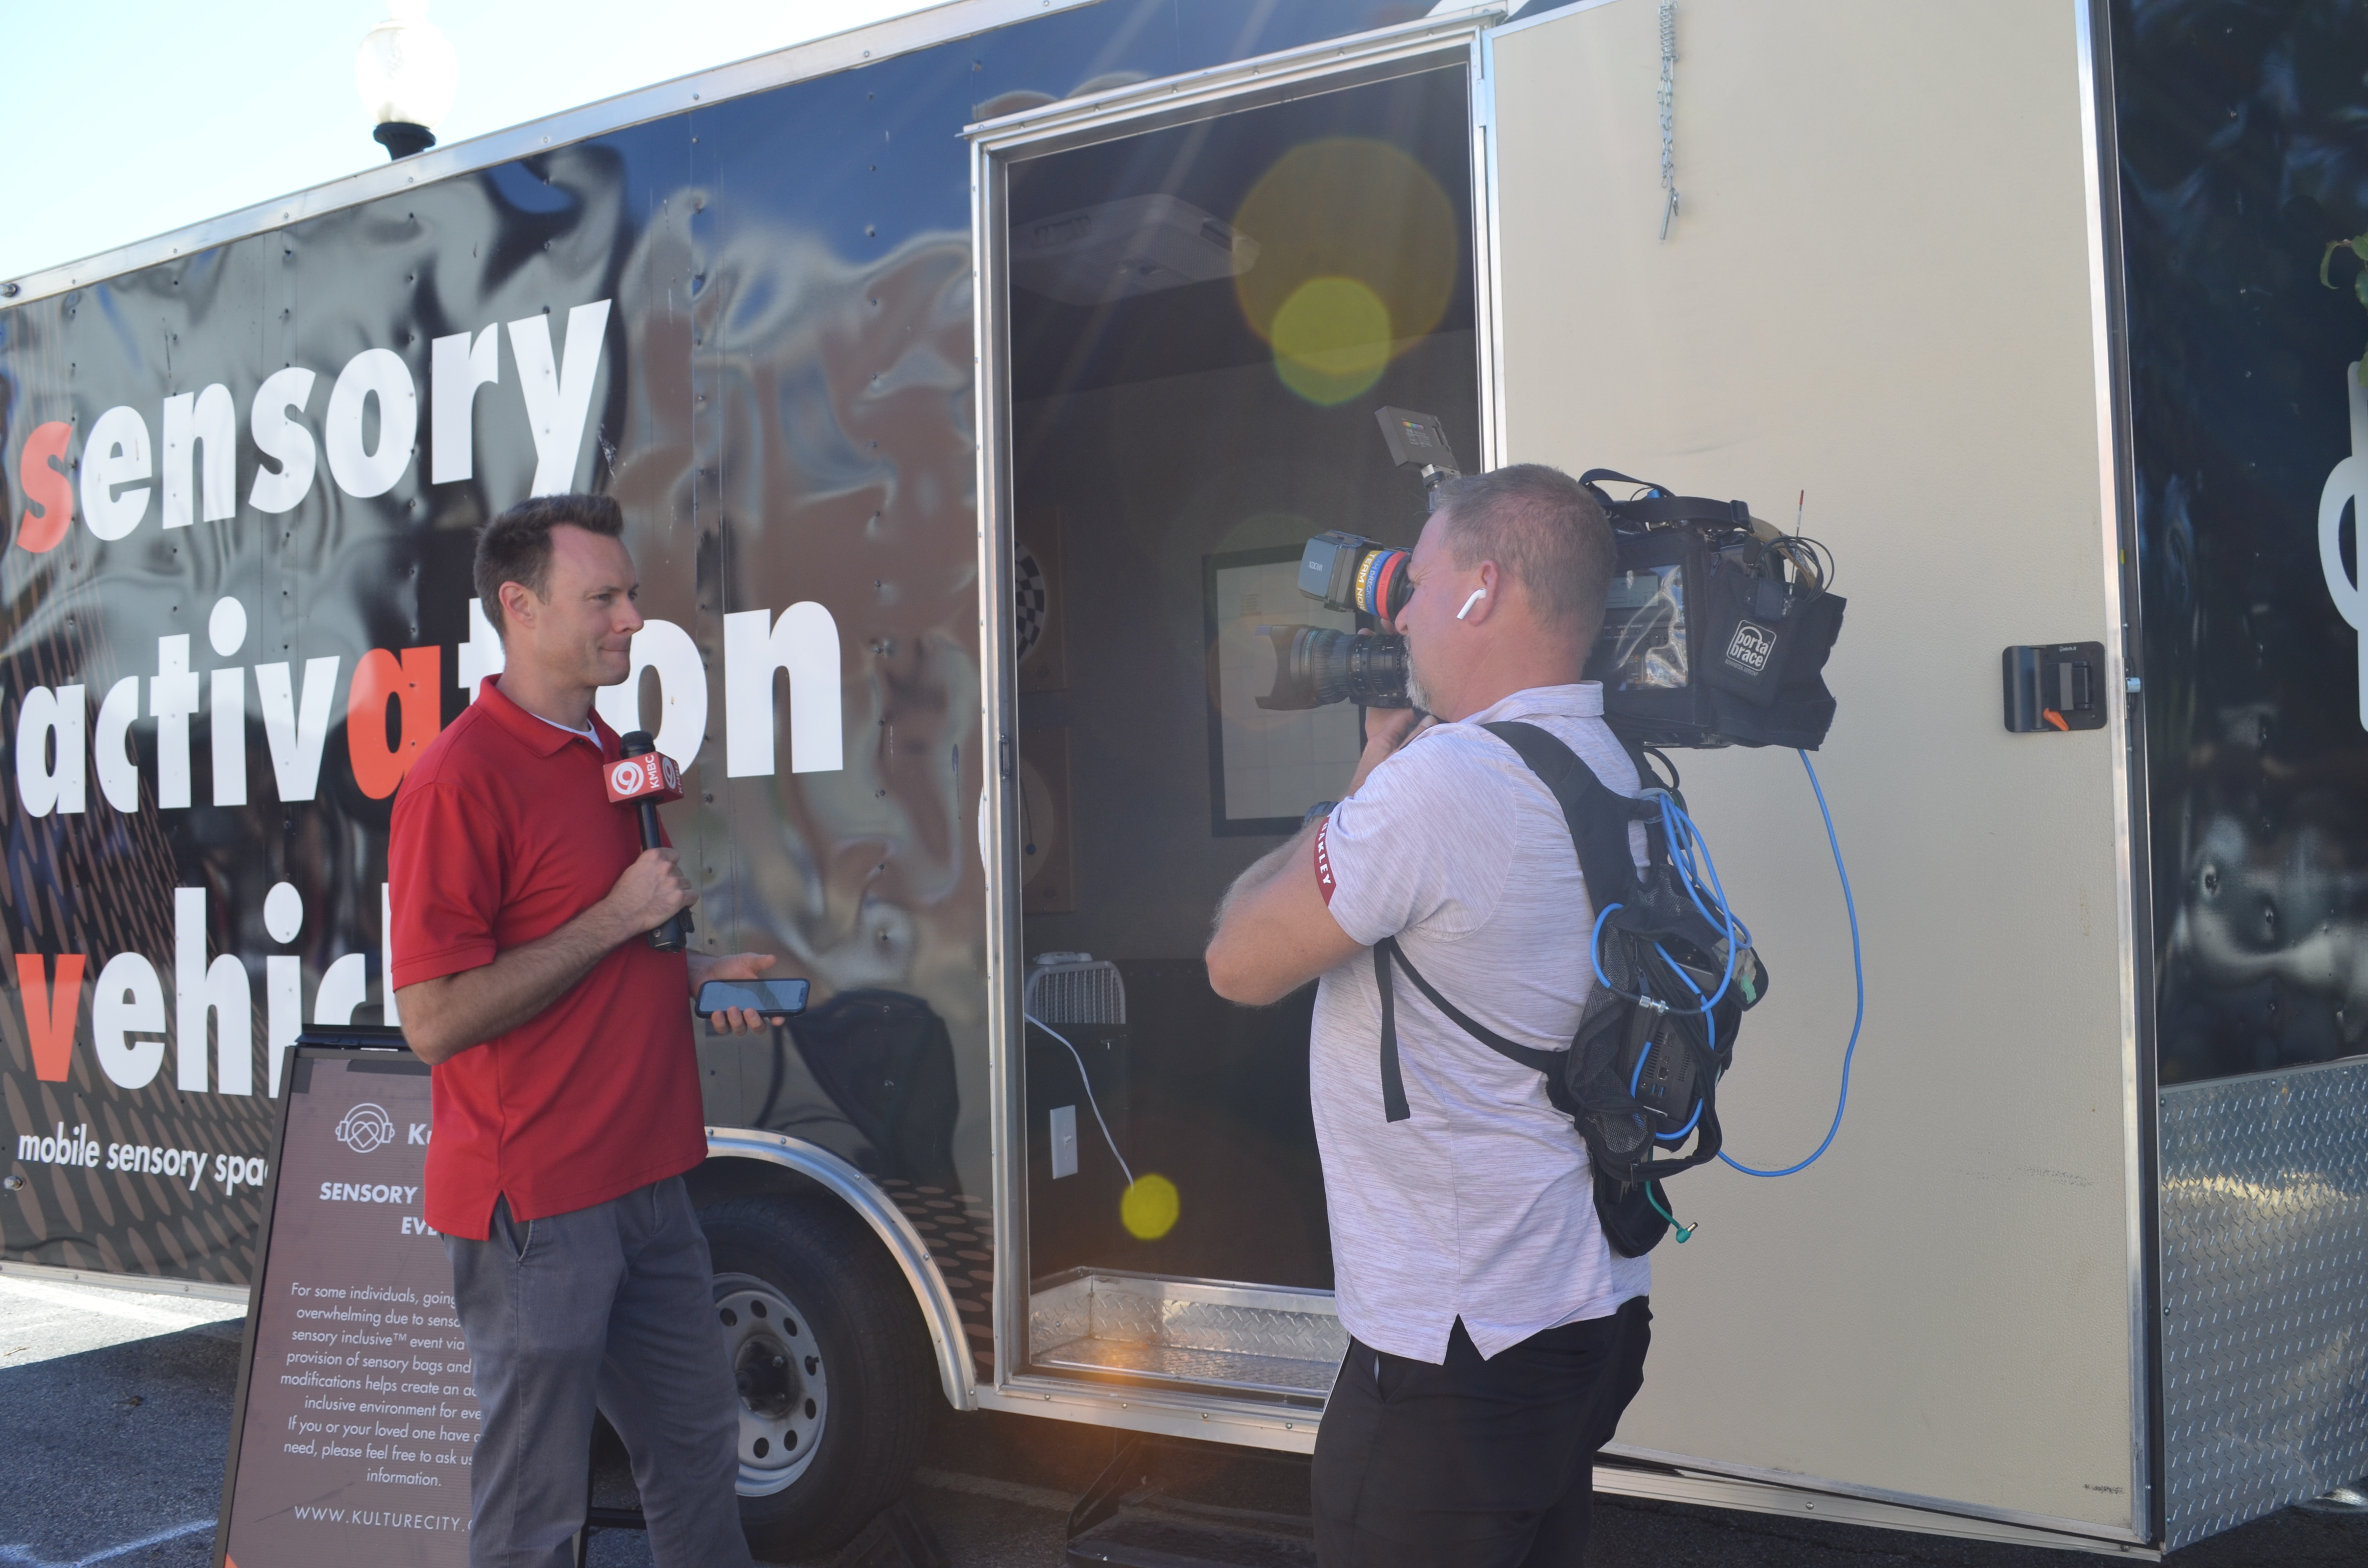 A reporter in a red shirt stands outside of the sensory activation trailer, a black van